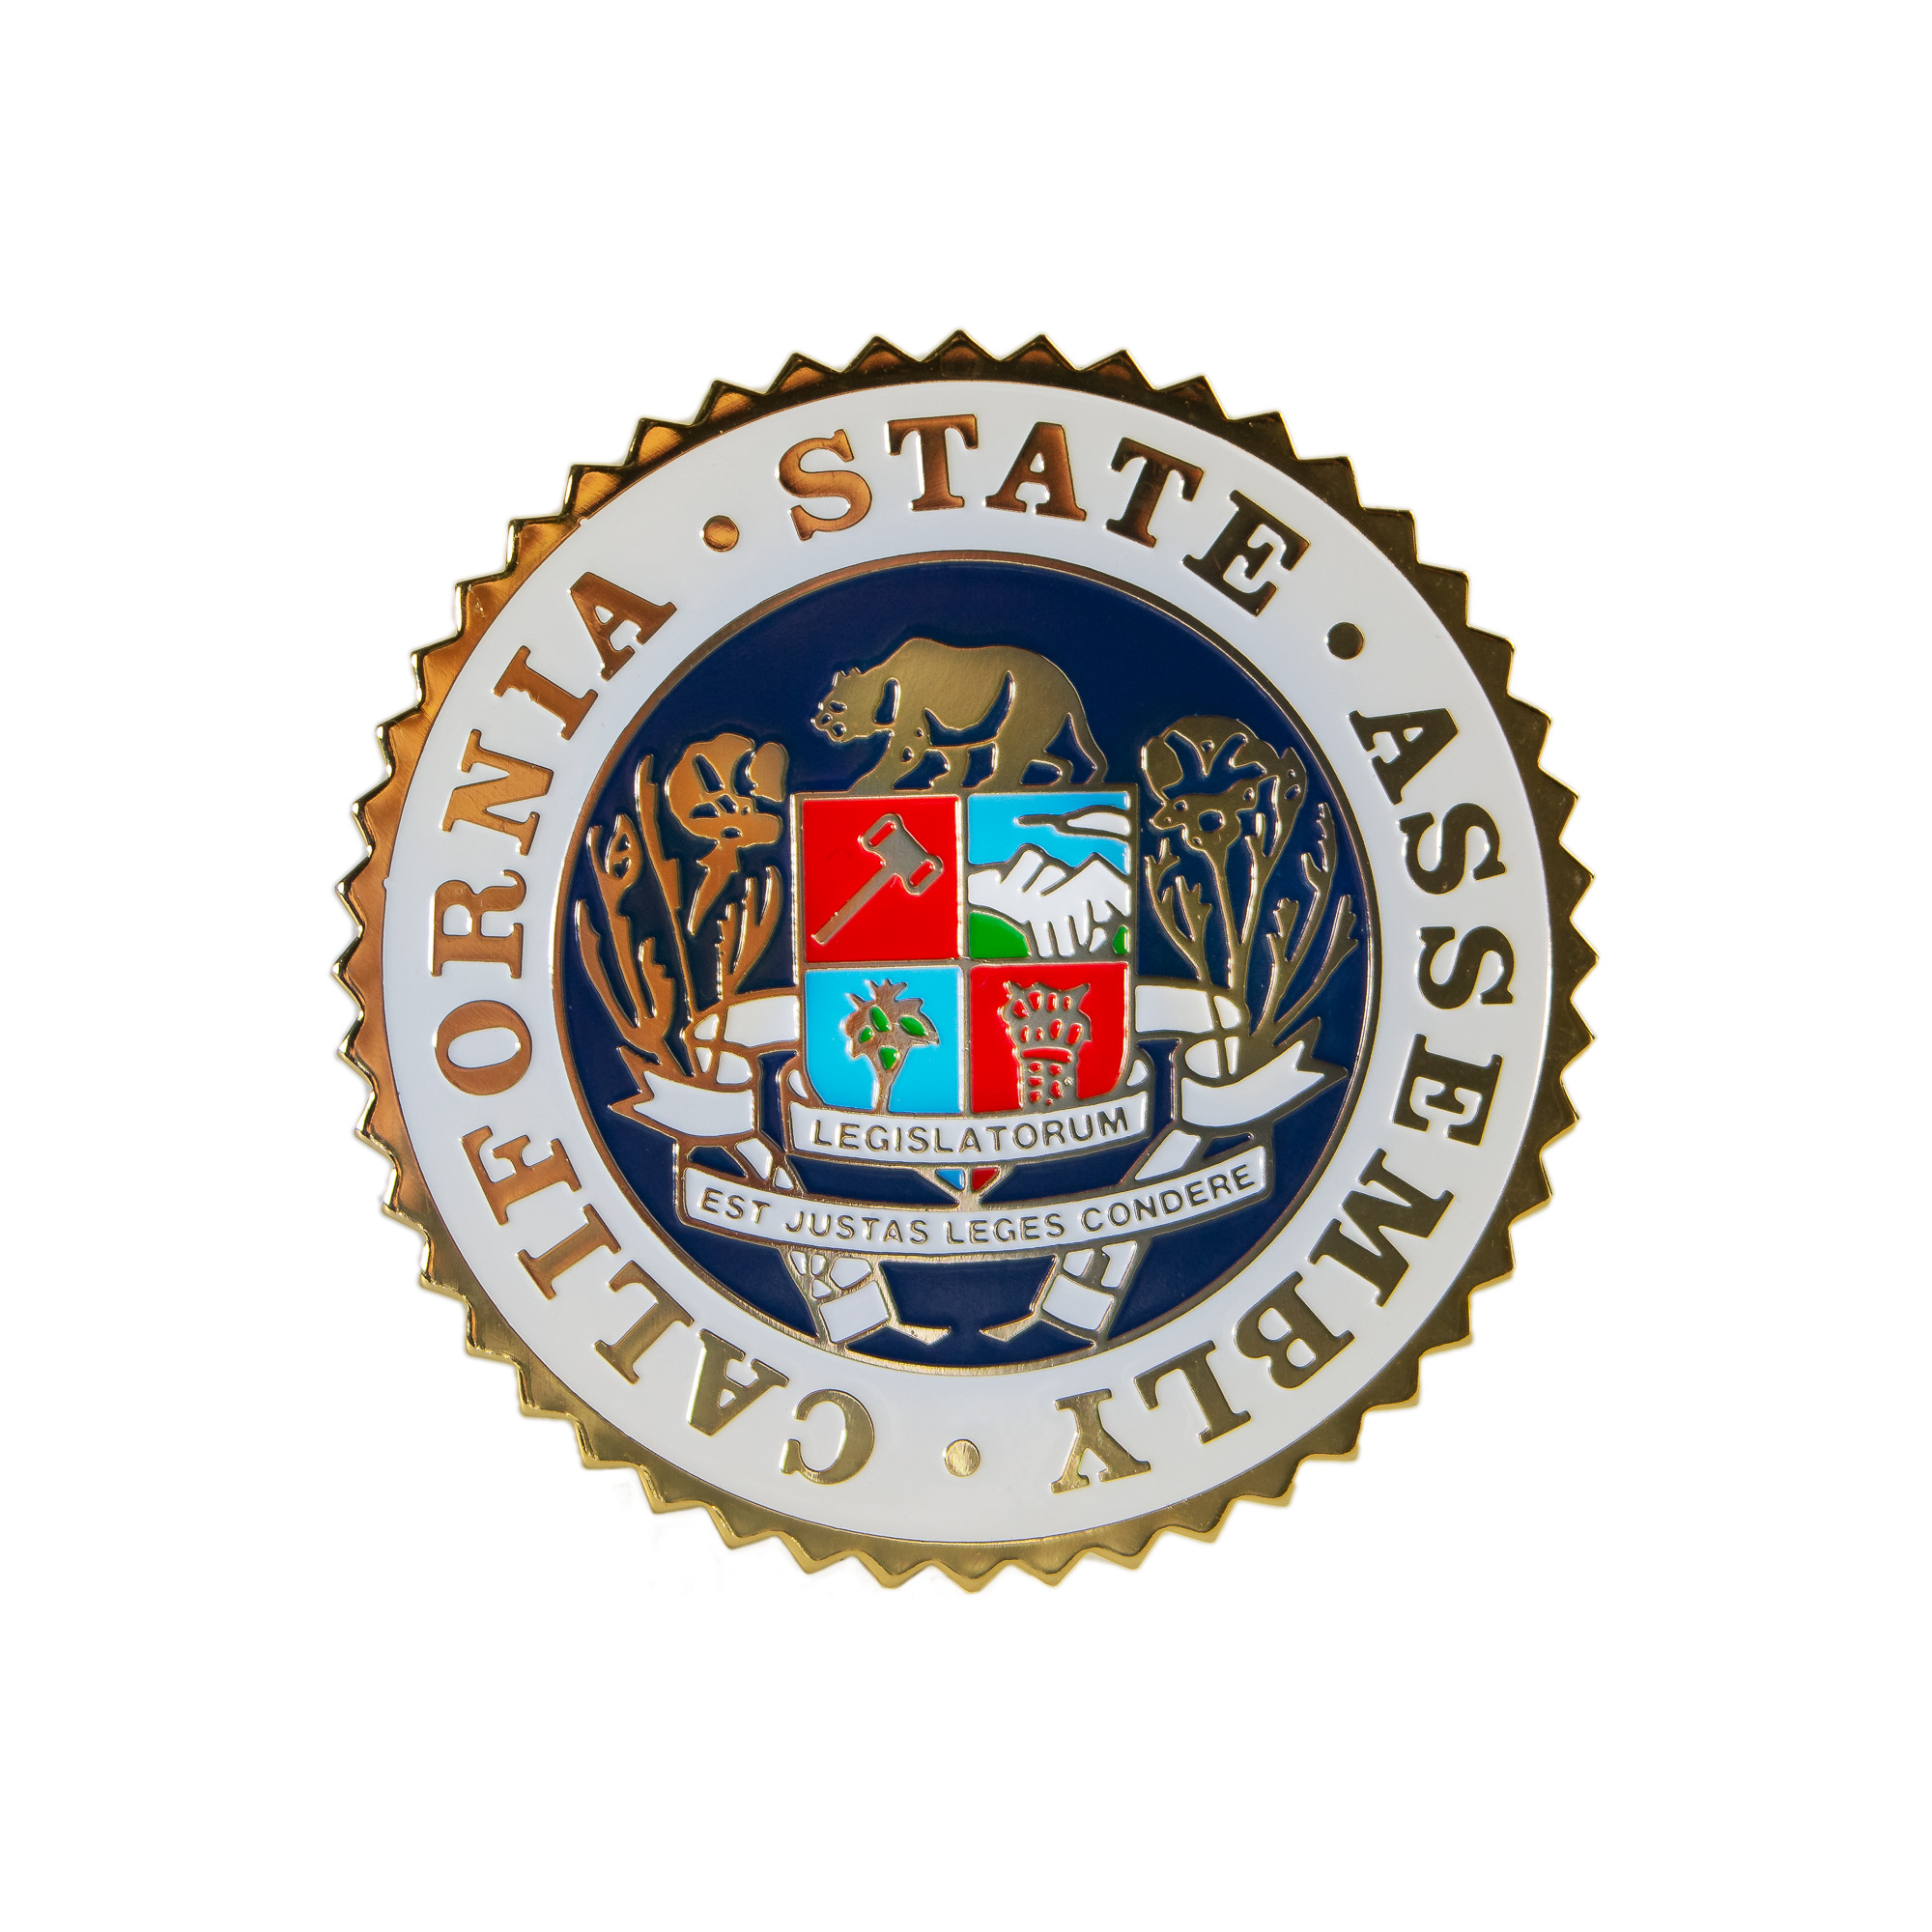 The State Assembly Seal